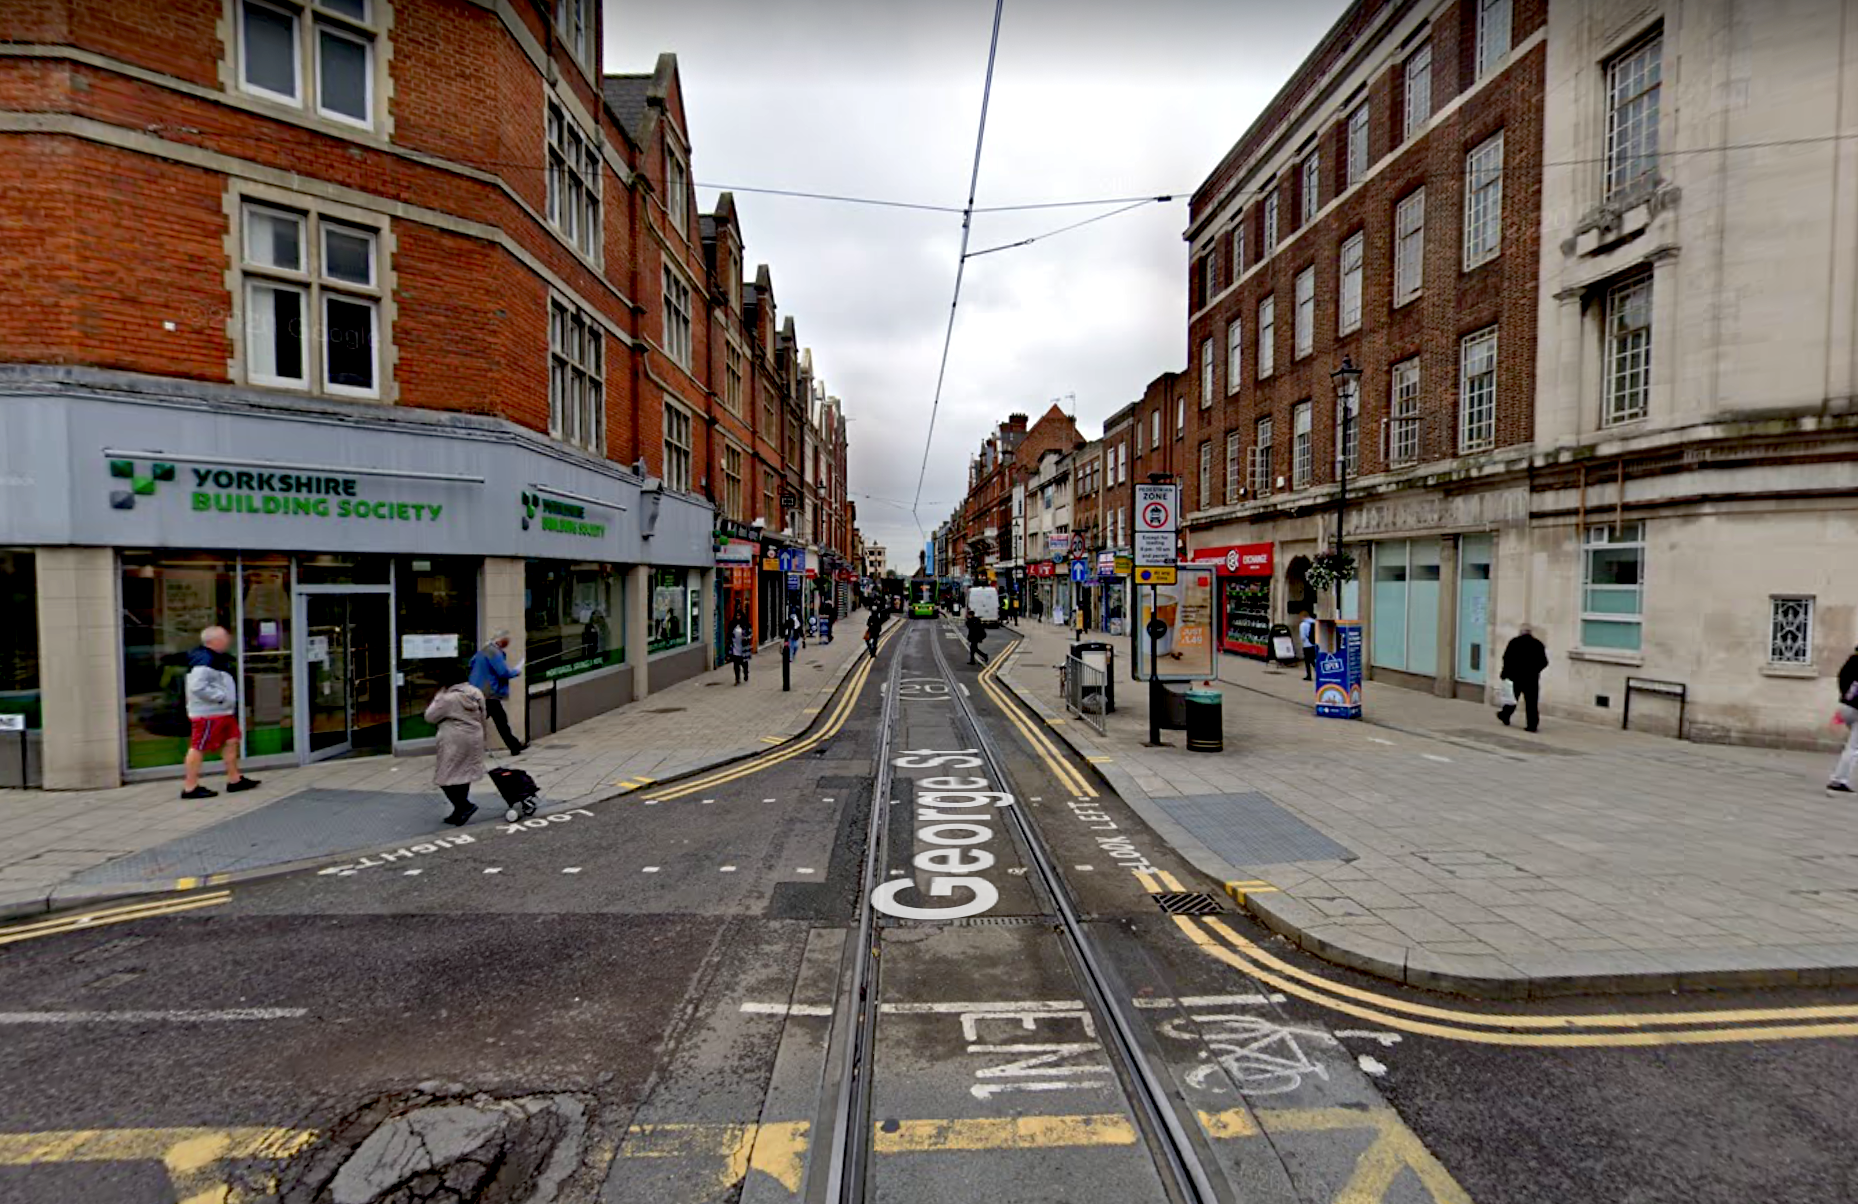 George Street in Croydon, where the stabbing took place early on Sunday